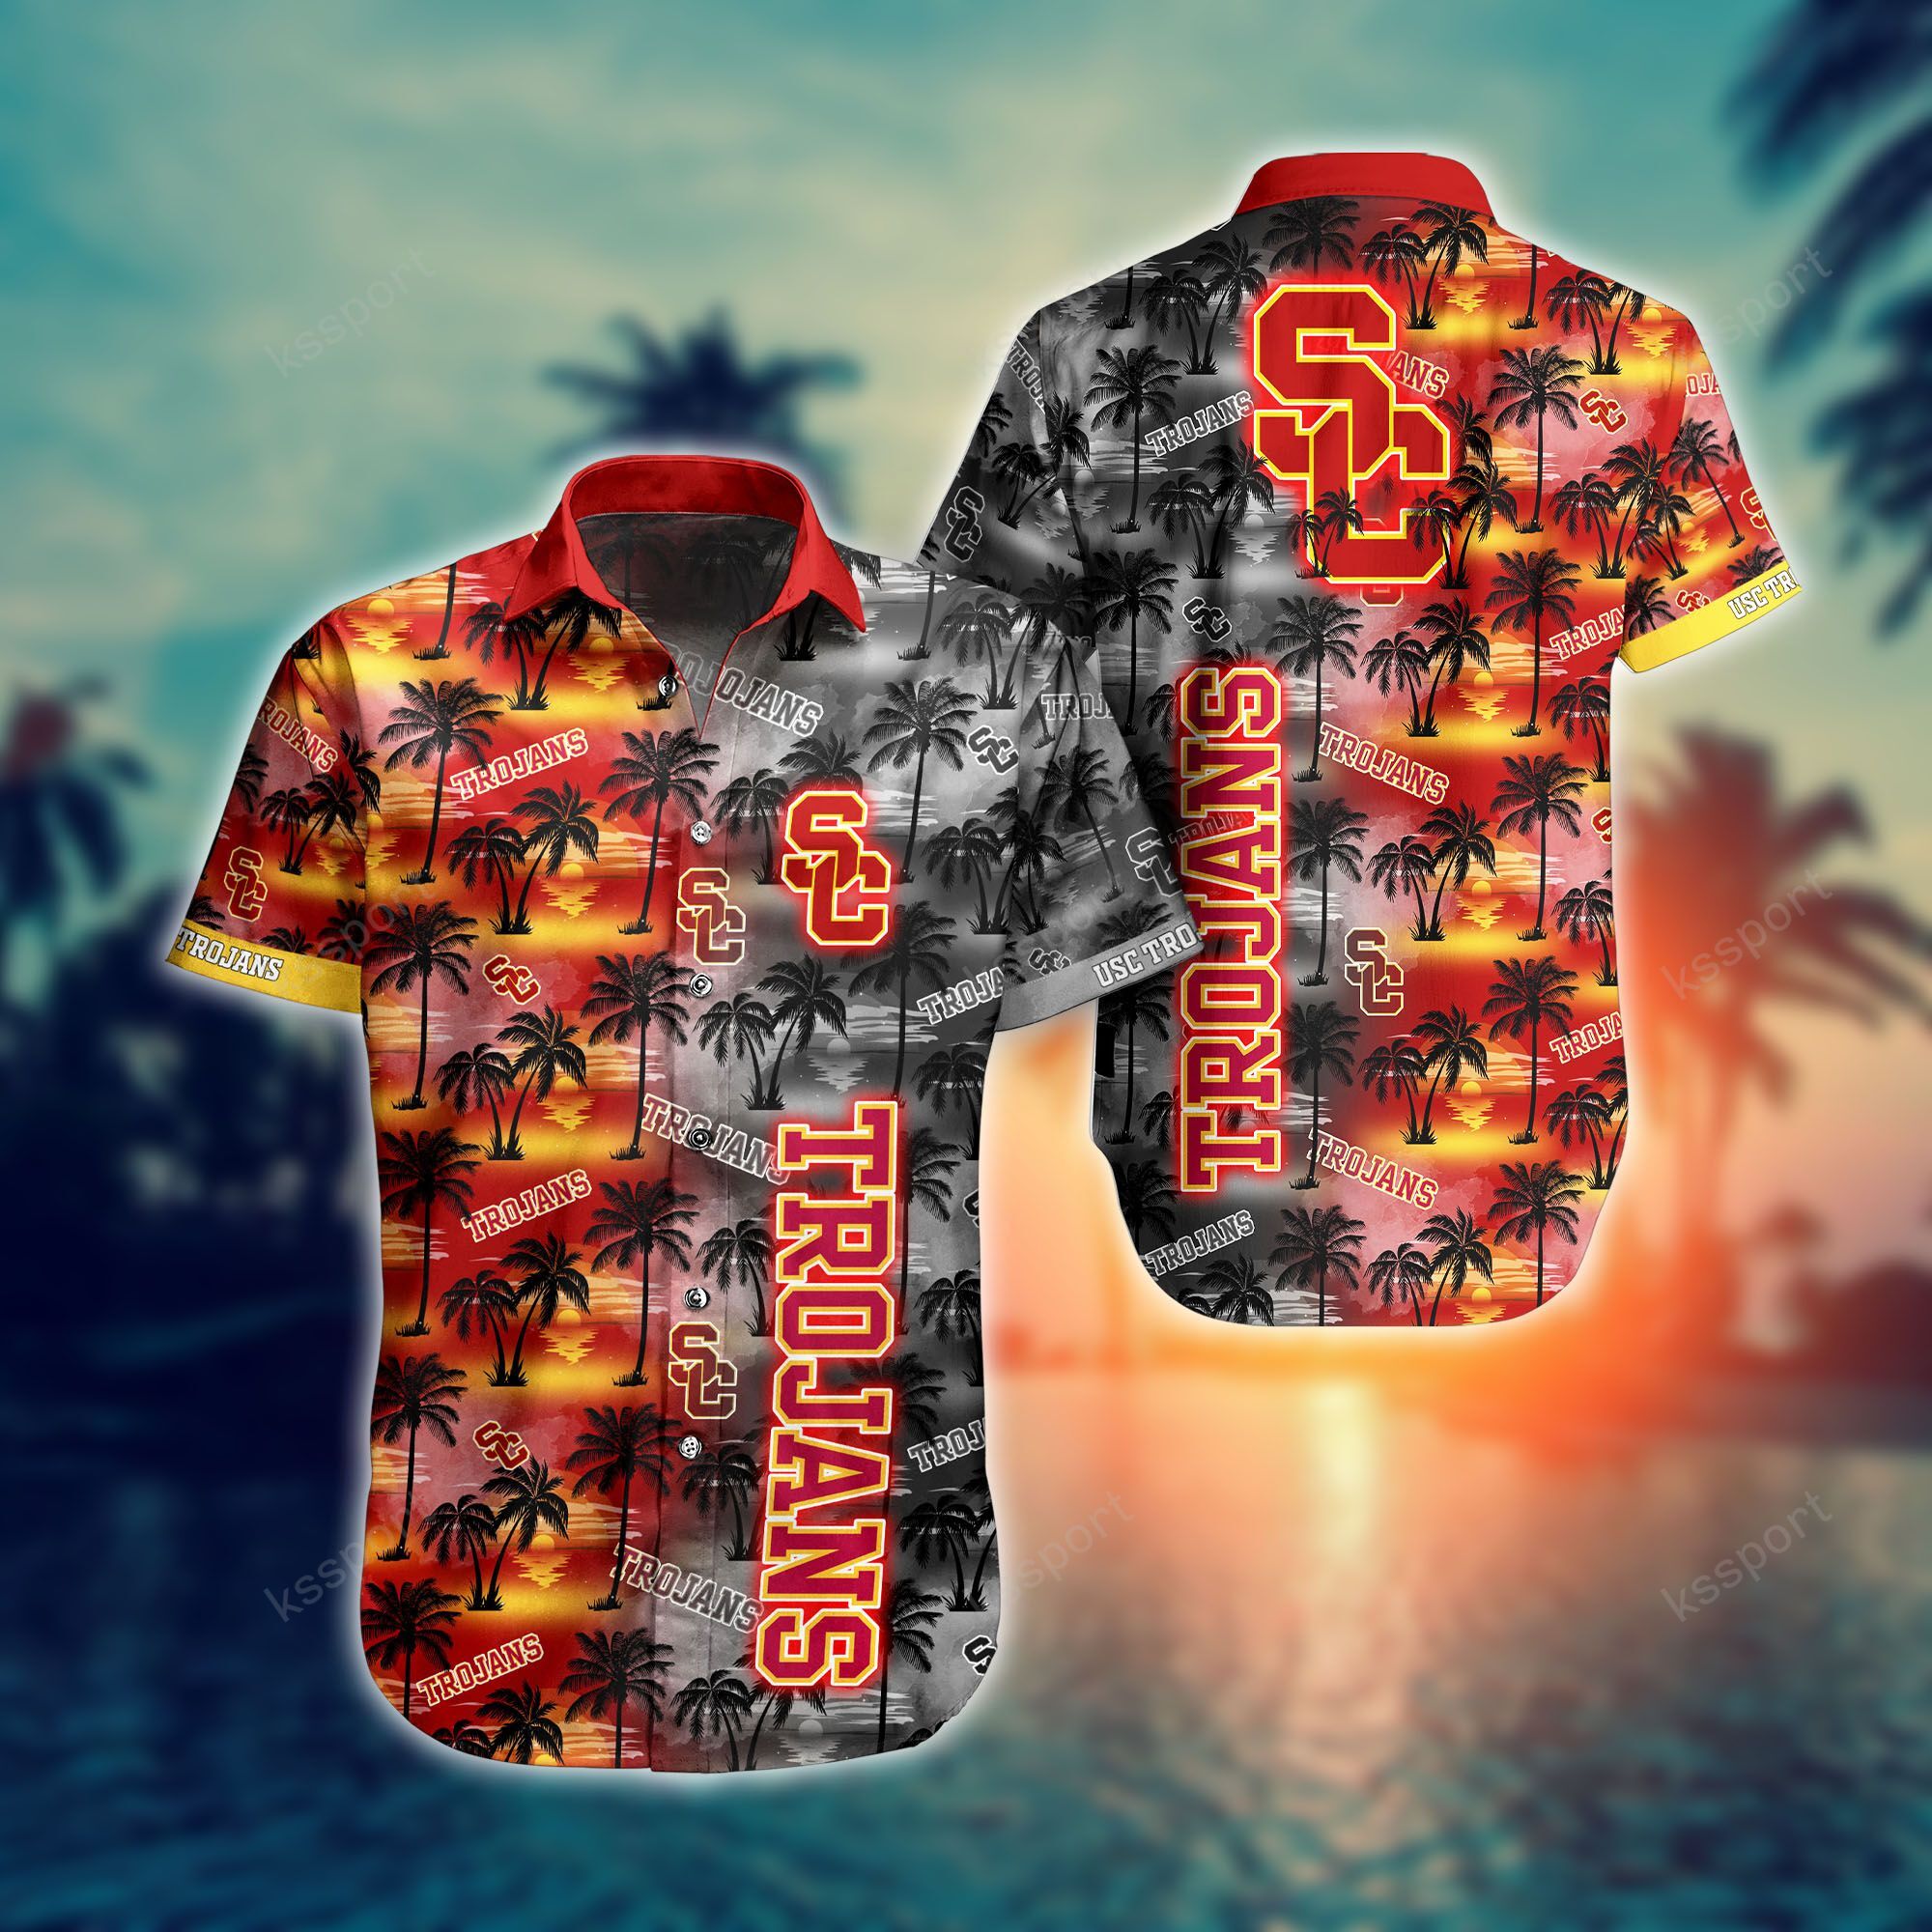 Treat yourself to a cool Hawaiian set today! 68